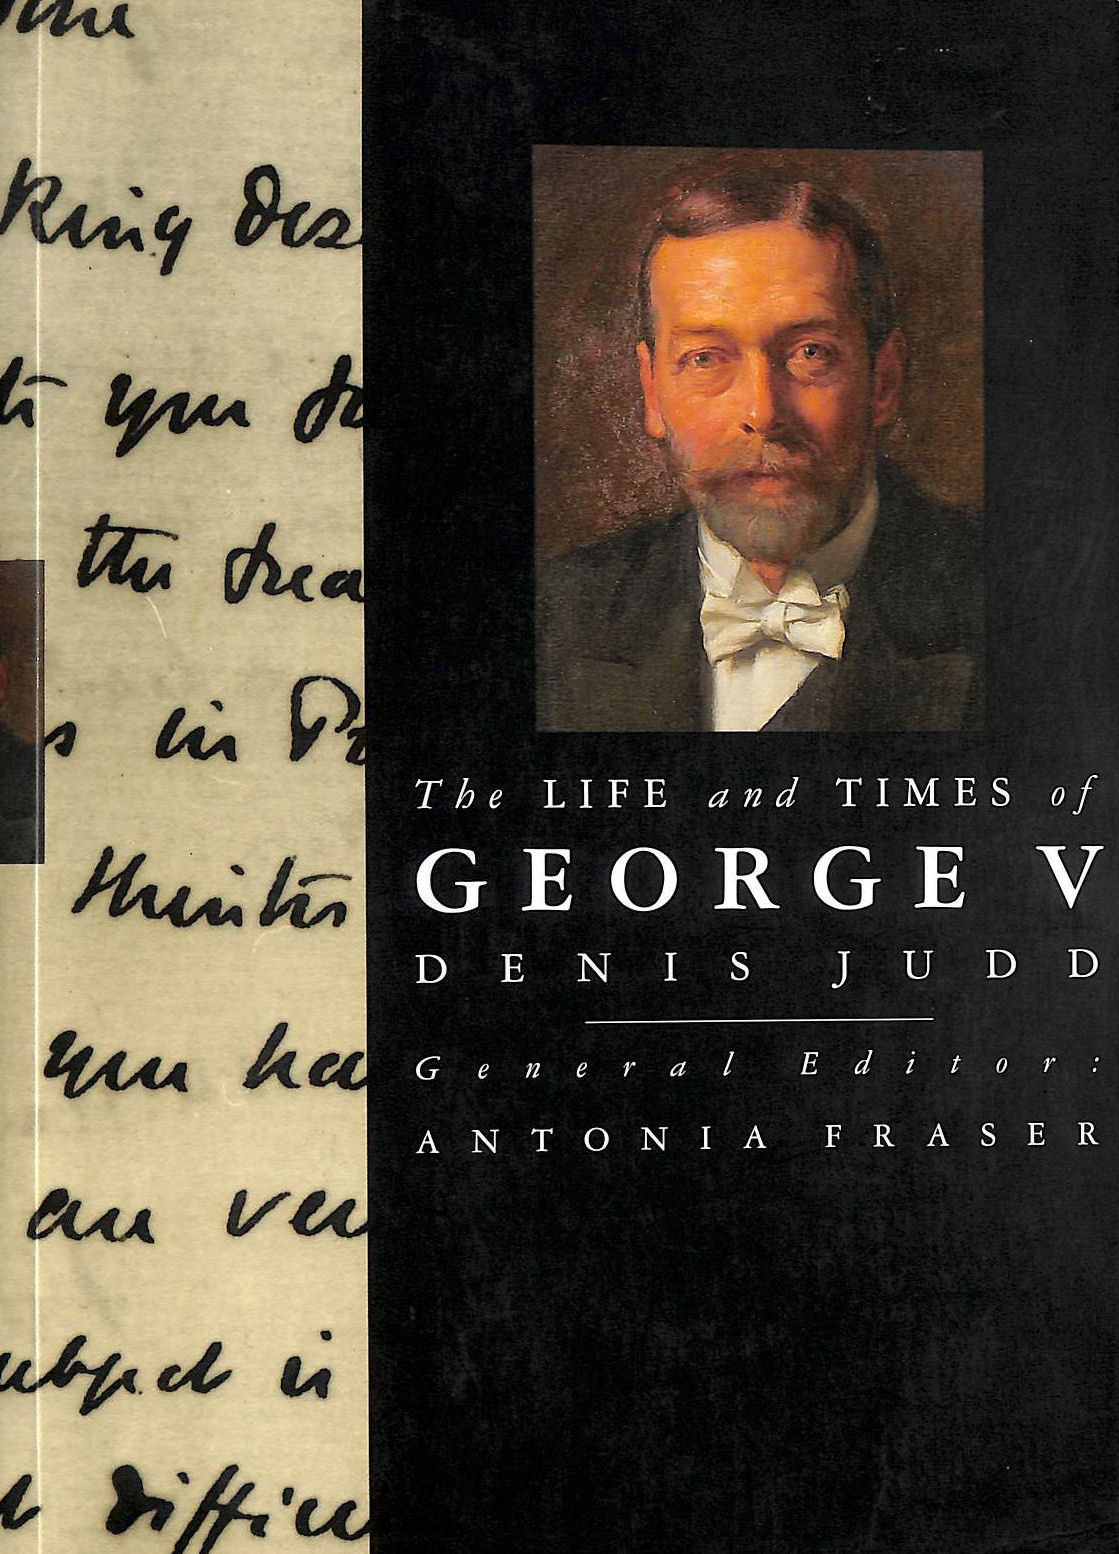 JUDD, DENIS; FRASER, ANTONIA [EDITOR] - The Life and Times of George V (Kings and Queens S.)